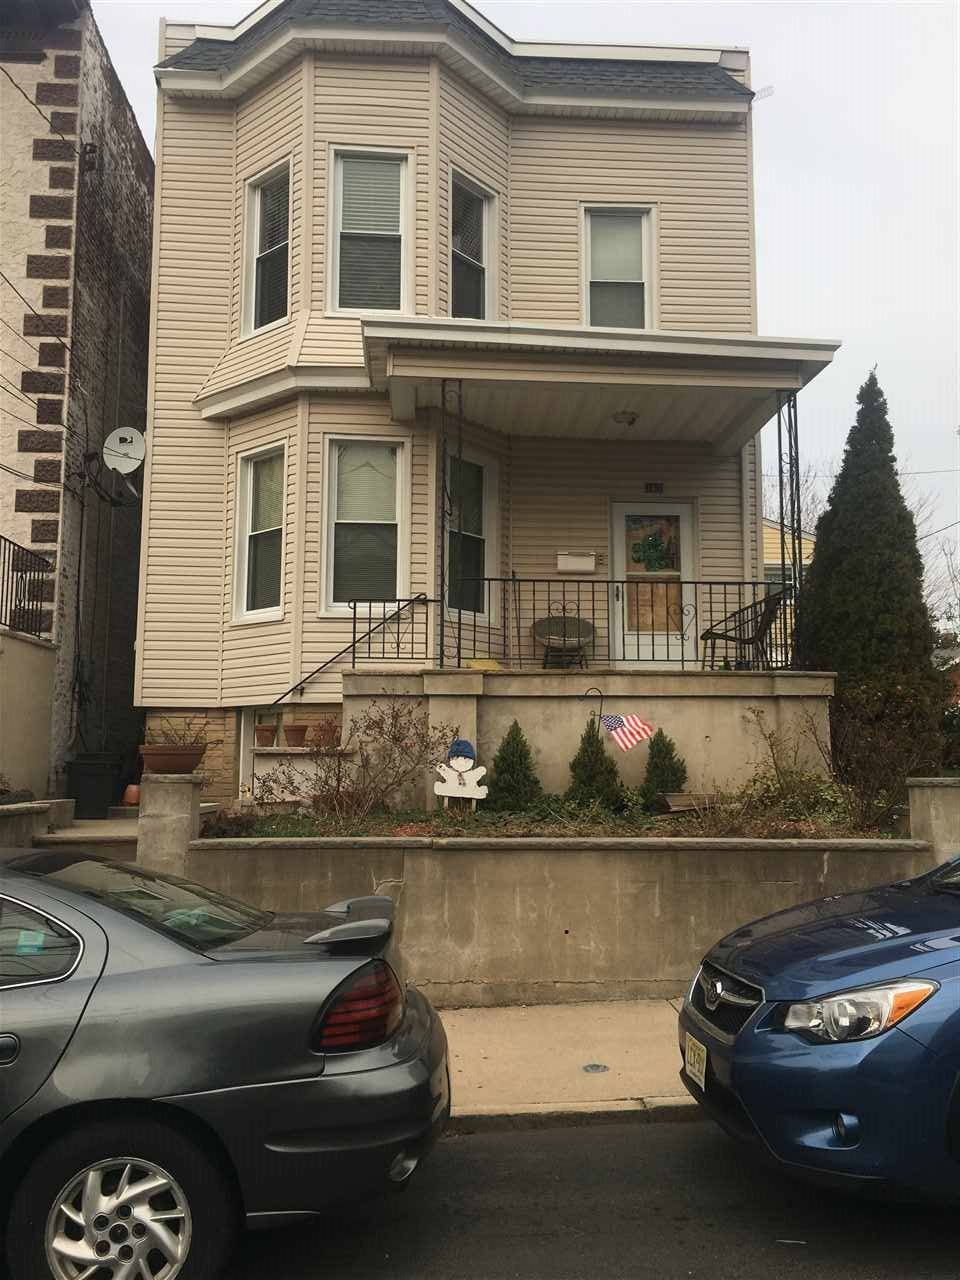 Calling investors legal two family home on north end walking distance to NYC transportation and schools